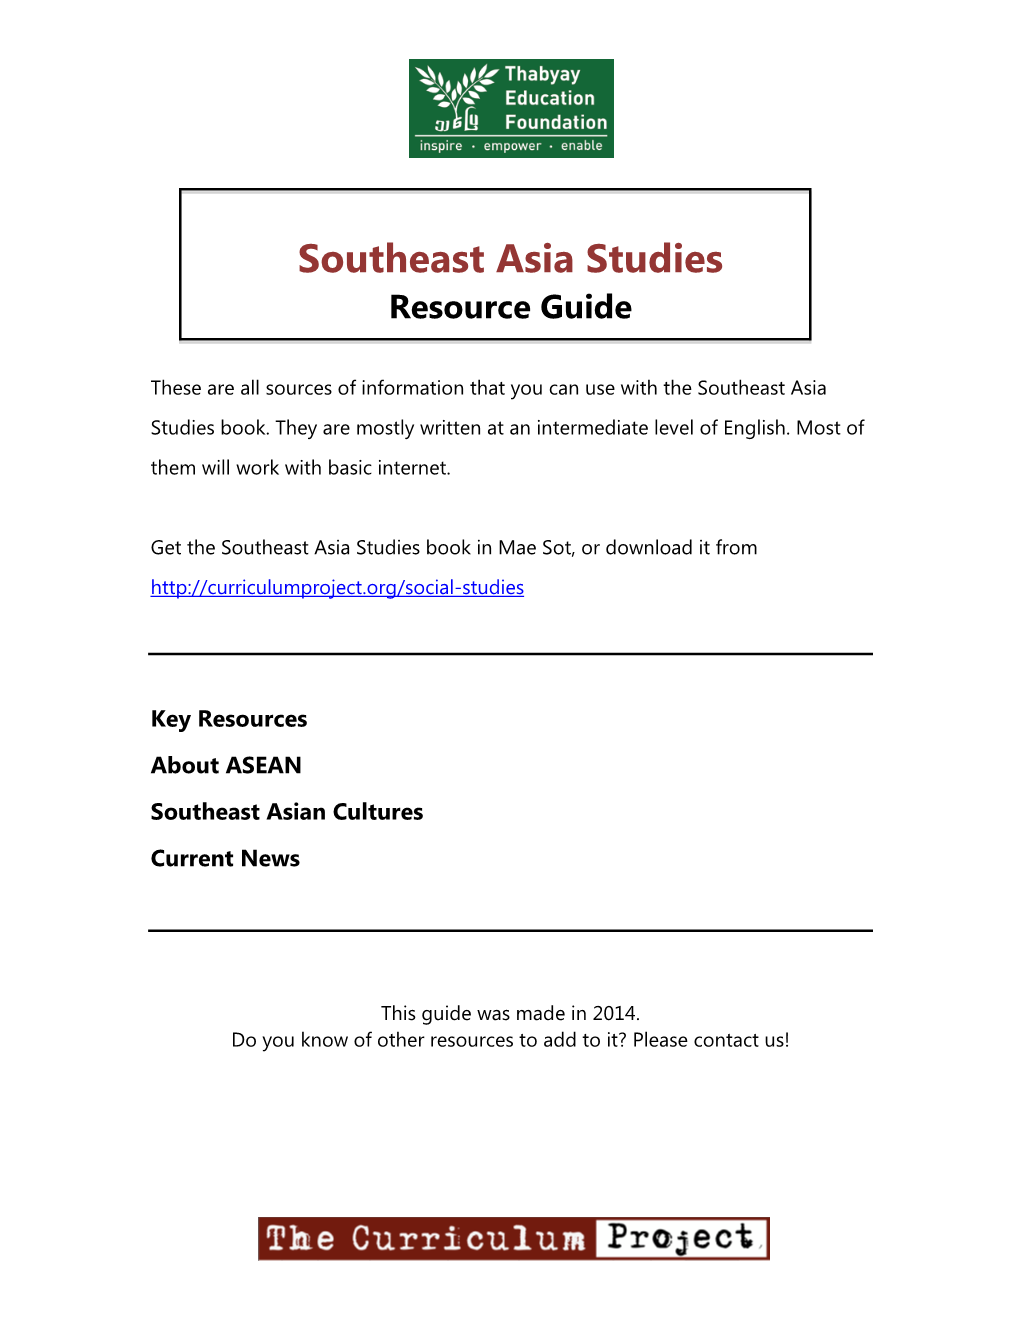 Southeast Asia Studies Resource Guide